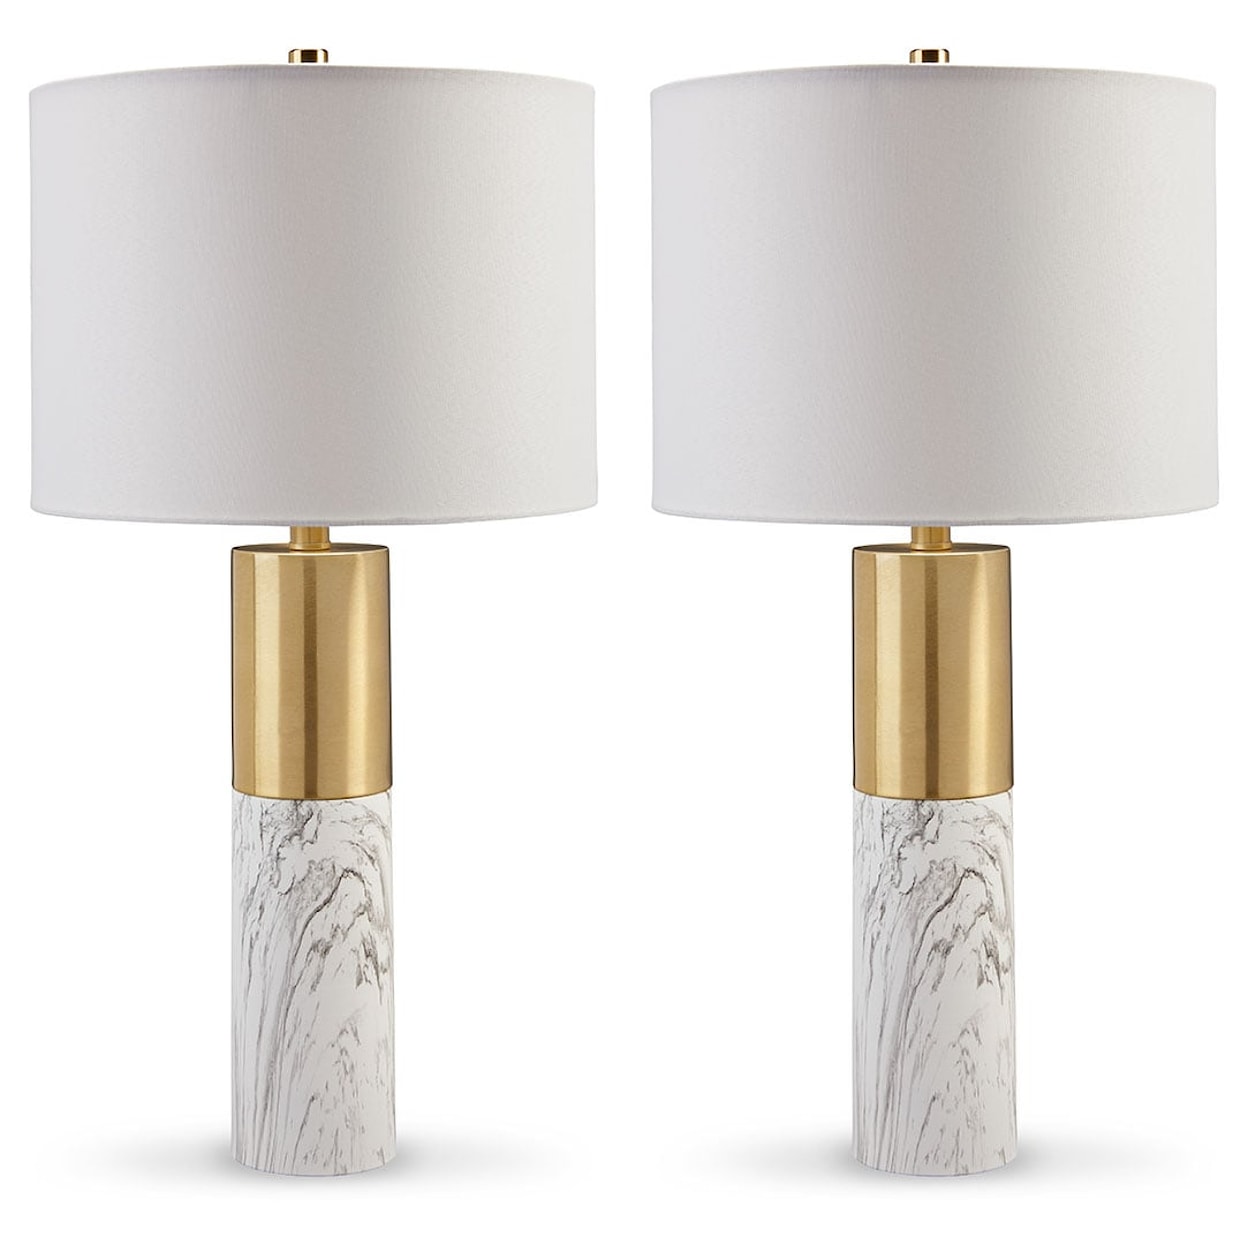 Signature Design by Ashley Lamps - Contemporary Samney Table Lamp (Set of 2)